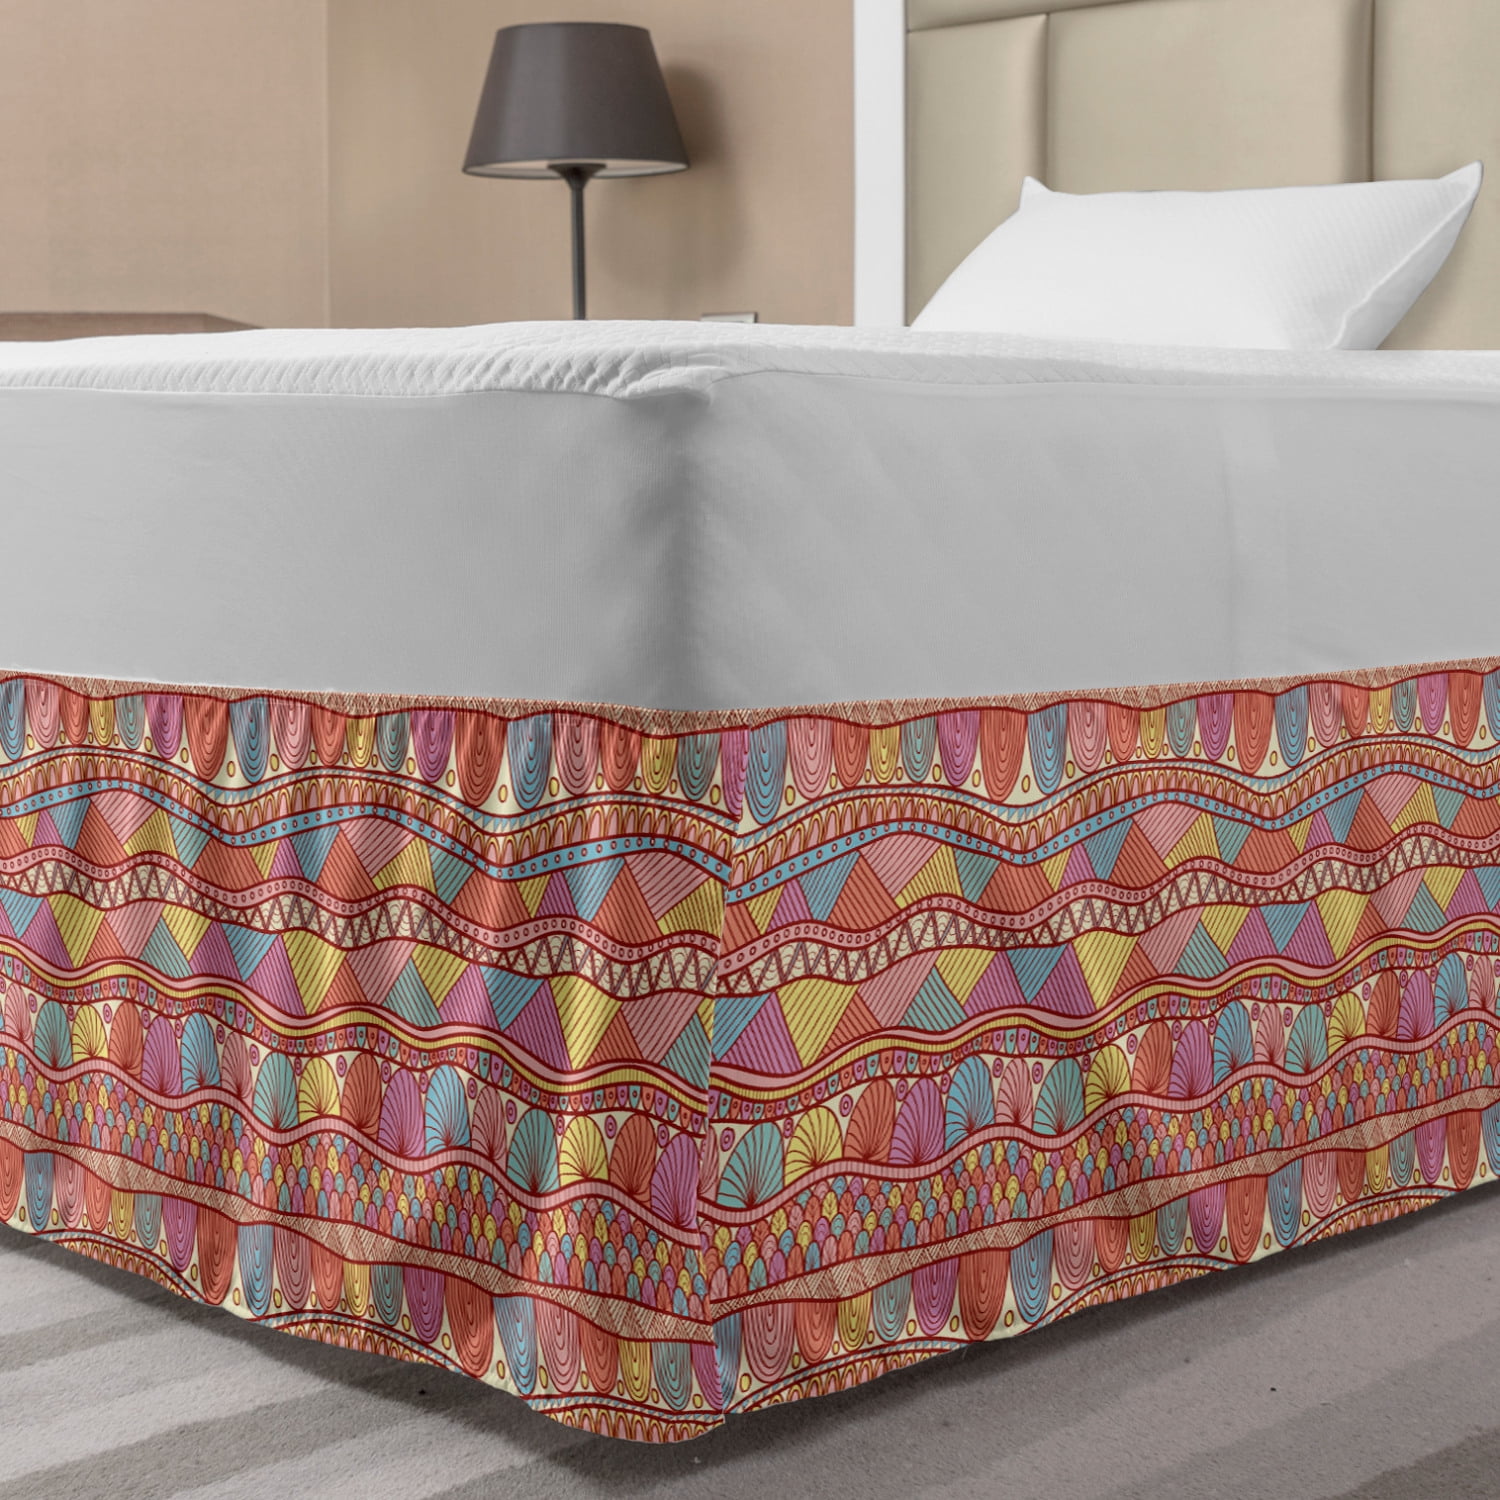 Ethnic Bed Skirt, Colorful Pattern Swirls Striped Abstract